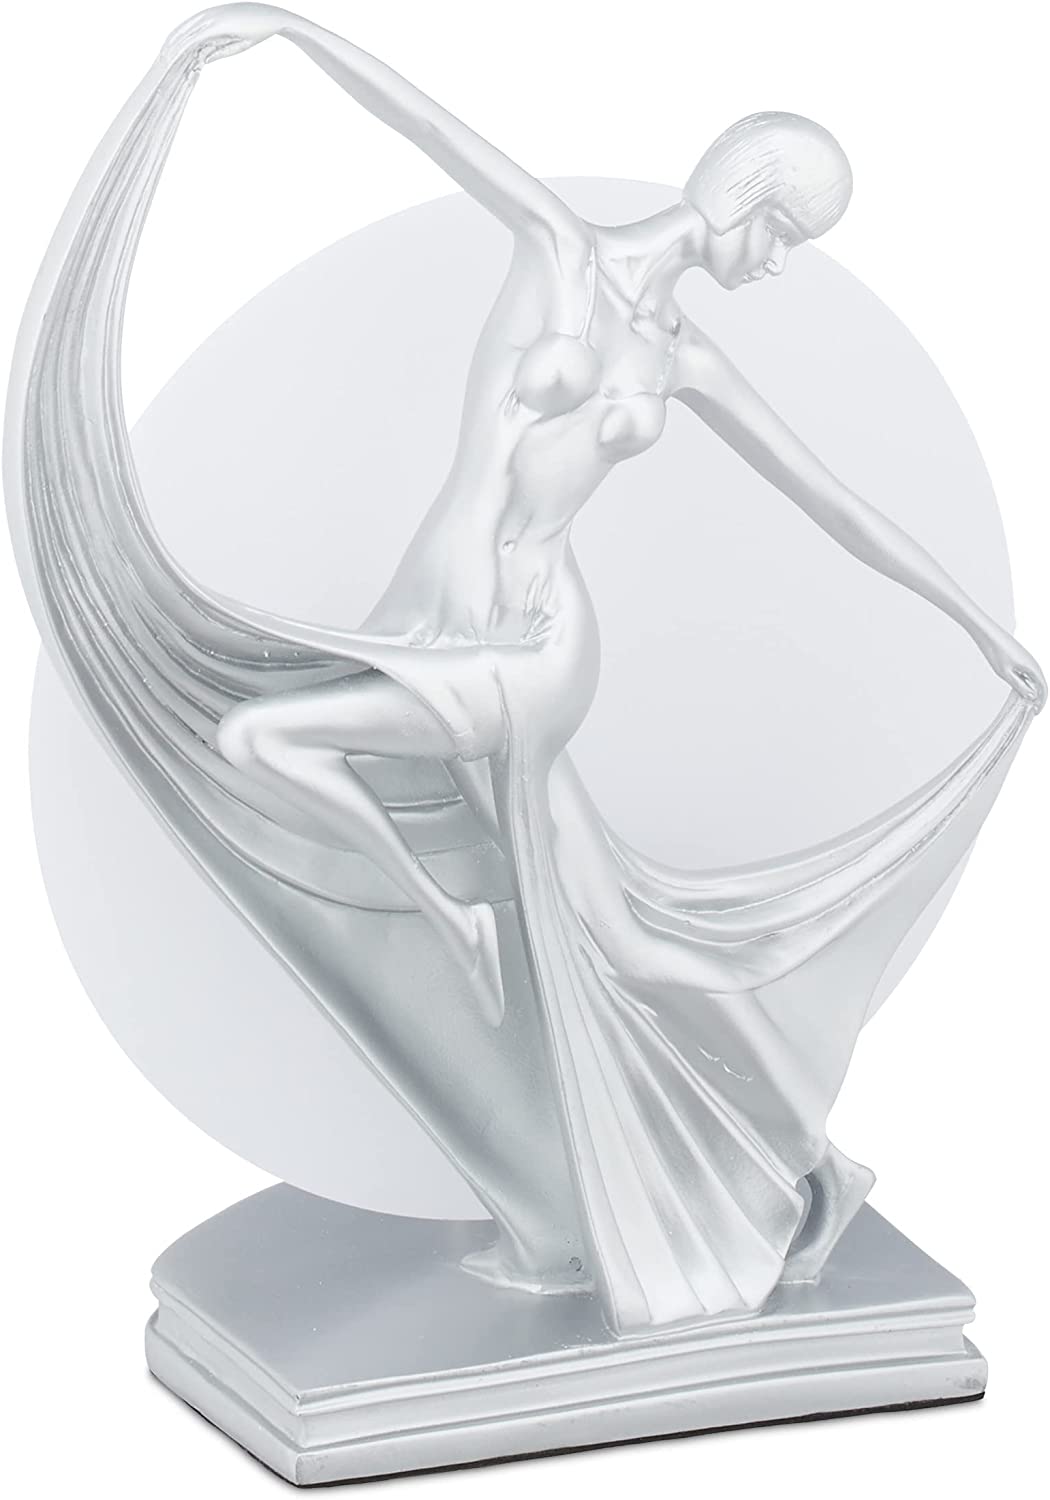 Relaxdays Table Lamp, Dancing Woman Figure, Indirect Light, E27 Socket, Bedside Table, Living Room, Table Lamp, Silver